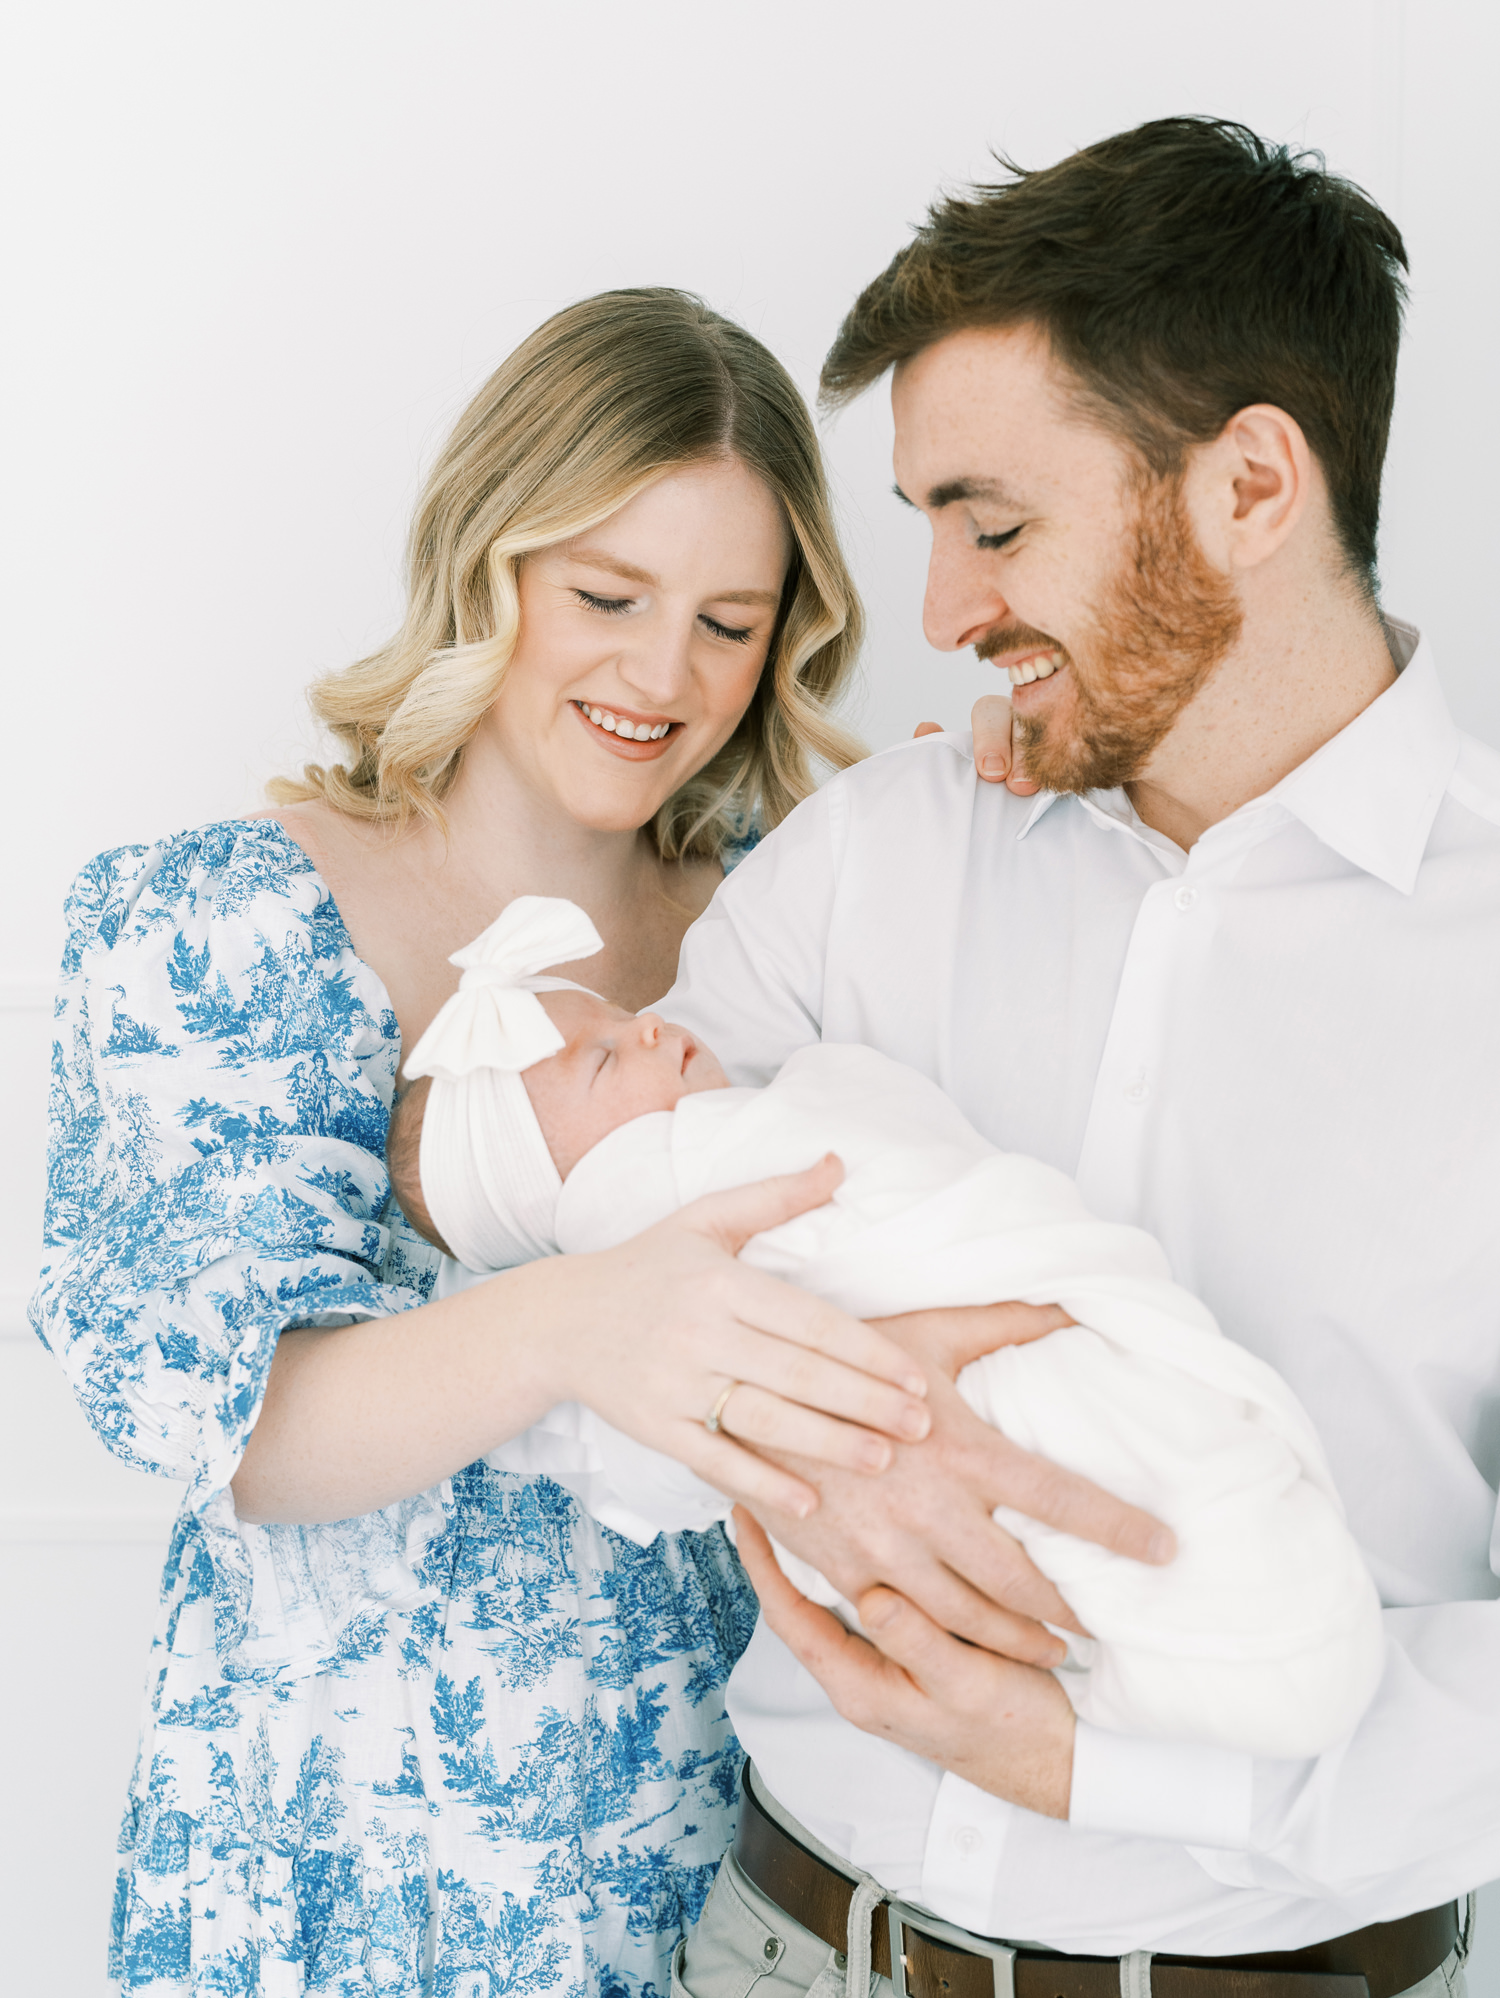 blonde new mother in blue and white dress standing next to her husband while he holds their new baby and smile down at them